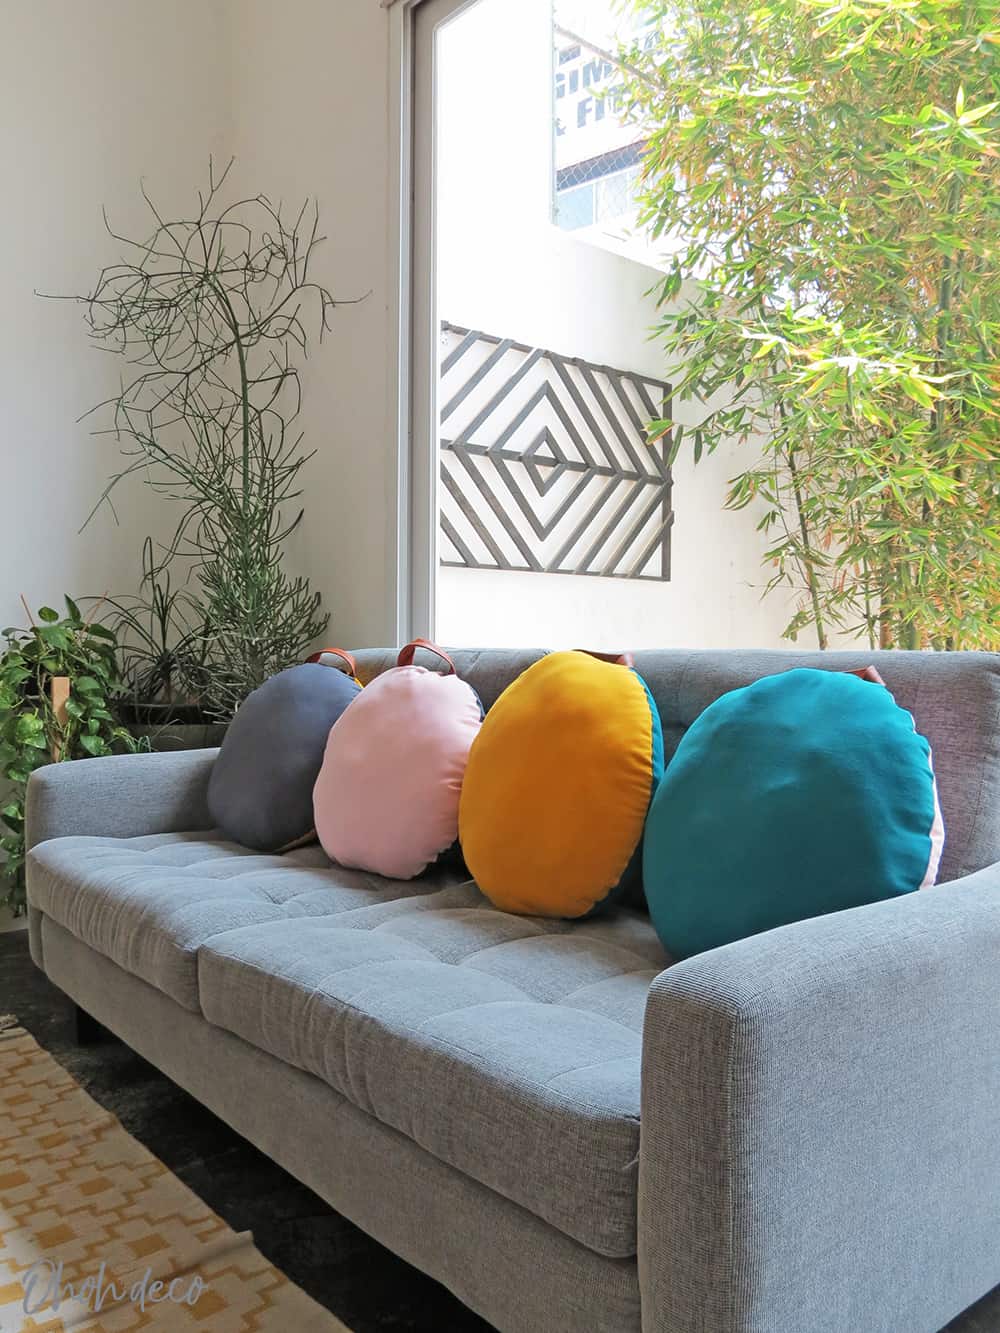 https://www.ohohdeco.com/wp-content/uploads/2019/05/how-to-sew-a-round-cushion-9.jpg